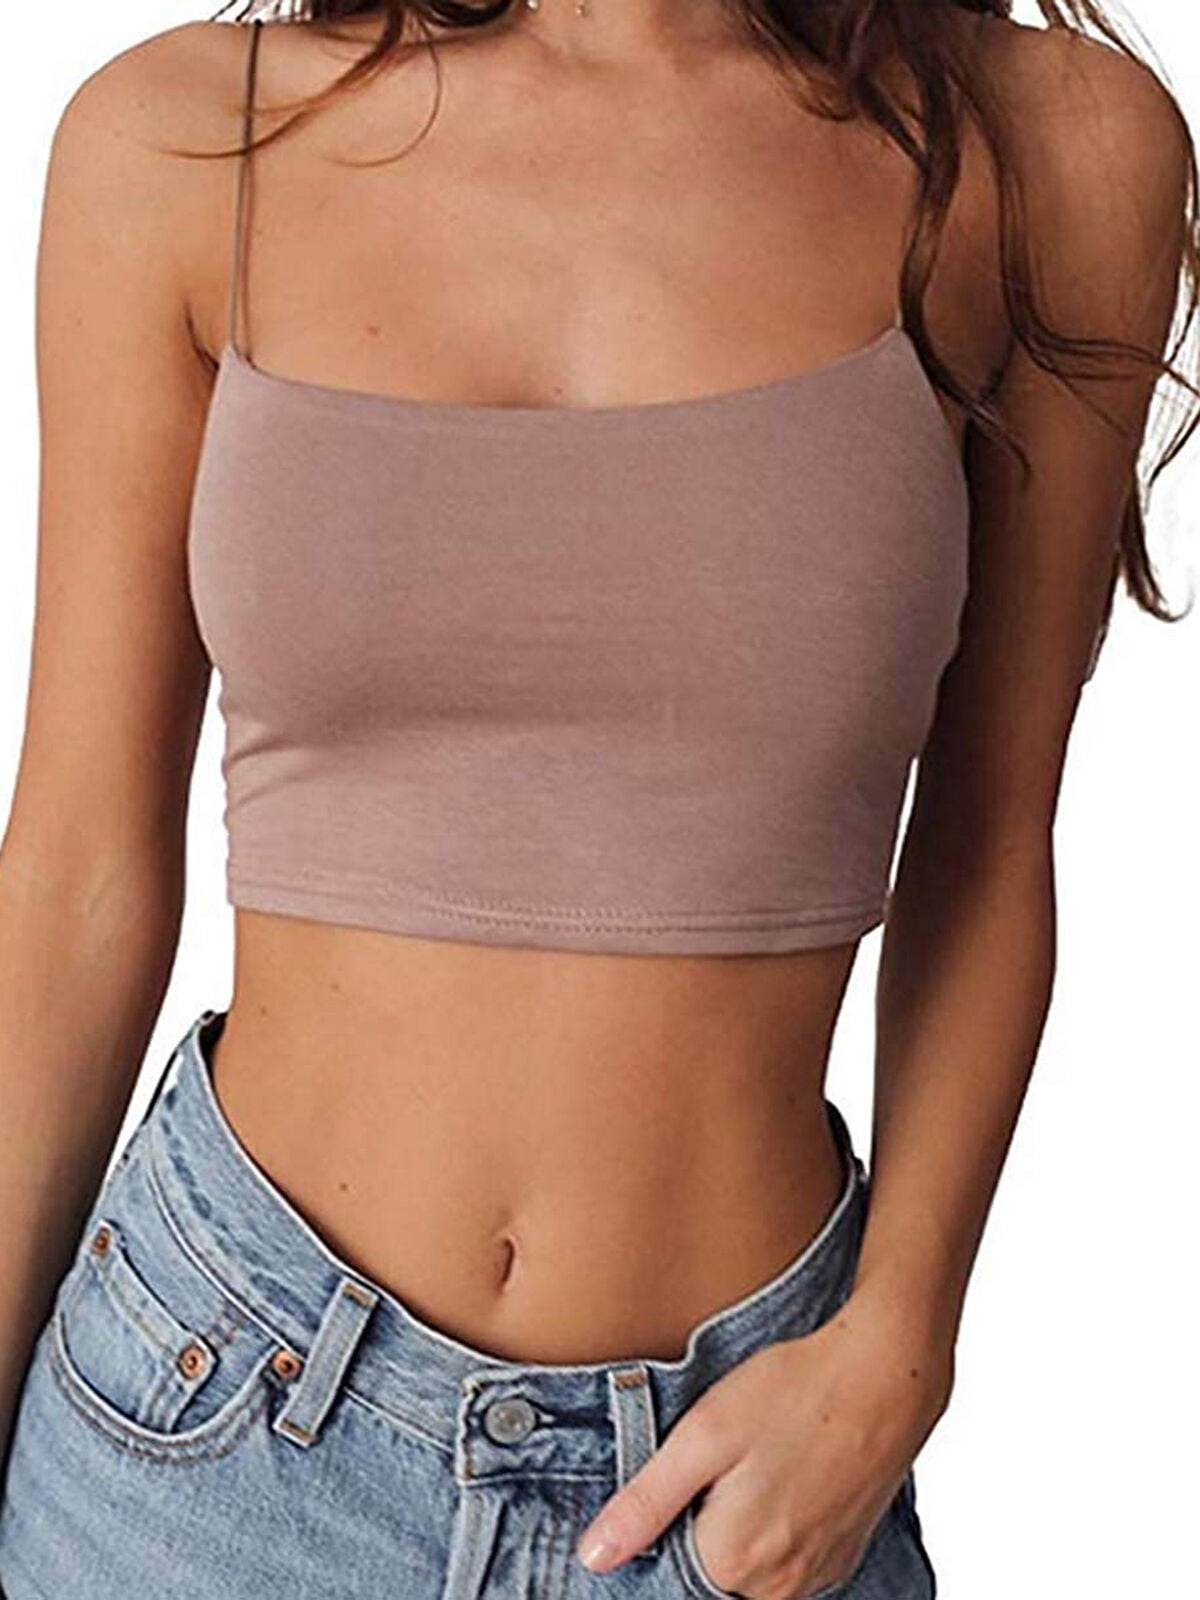 MISYAA Perspective Crop Tops for Women Short Sleeve Hollowed Fishnet Tee Short Shirt Tank Top Party Camis Tops